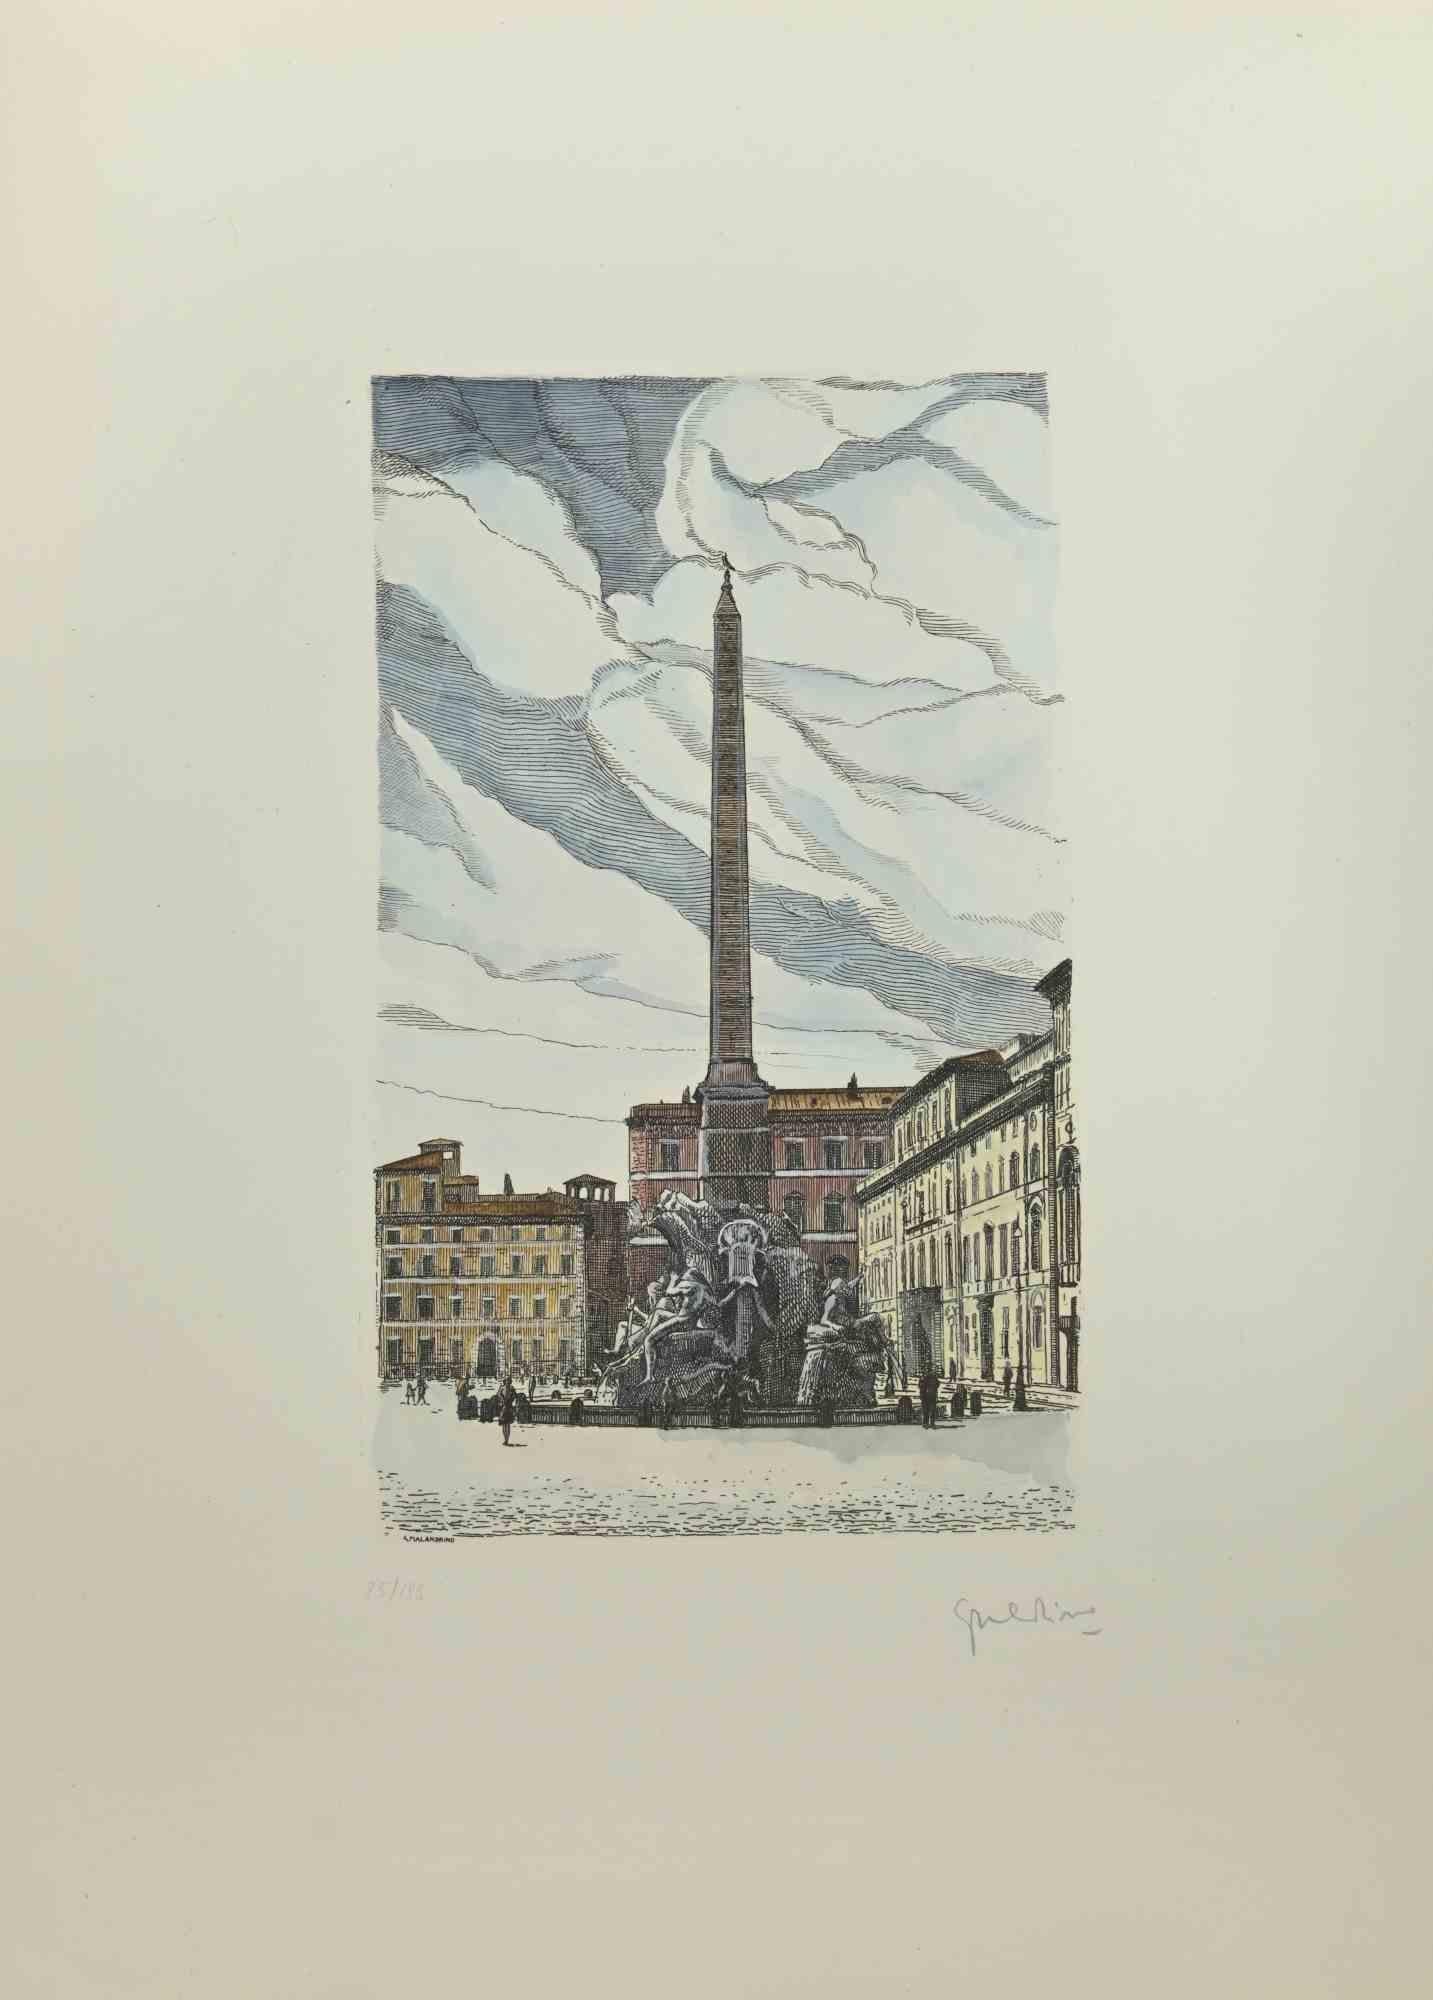 Navona Square - Rome is an artwork realized by  Giuseppe Malandrino .

Print in etching technique.

Hand-signed  by the artist in pencil on the lower right corner. Numbered on the lower-left corner. Edition 25/199.

Good conditions. 

This artwork